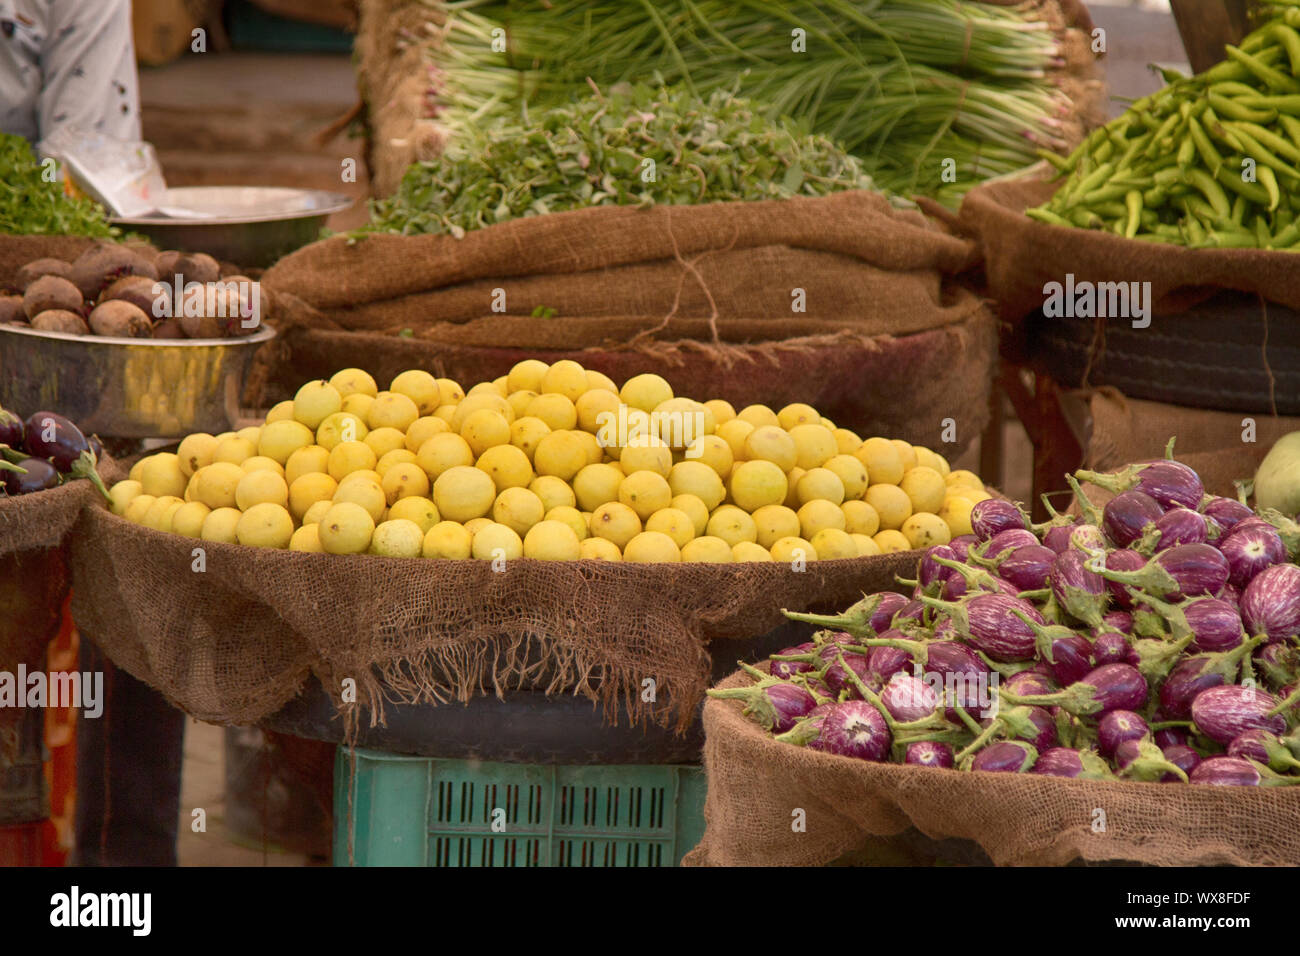 Cooking and dishes from street cafes in India Stock Photo